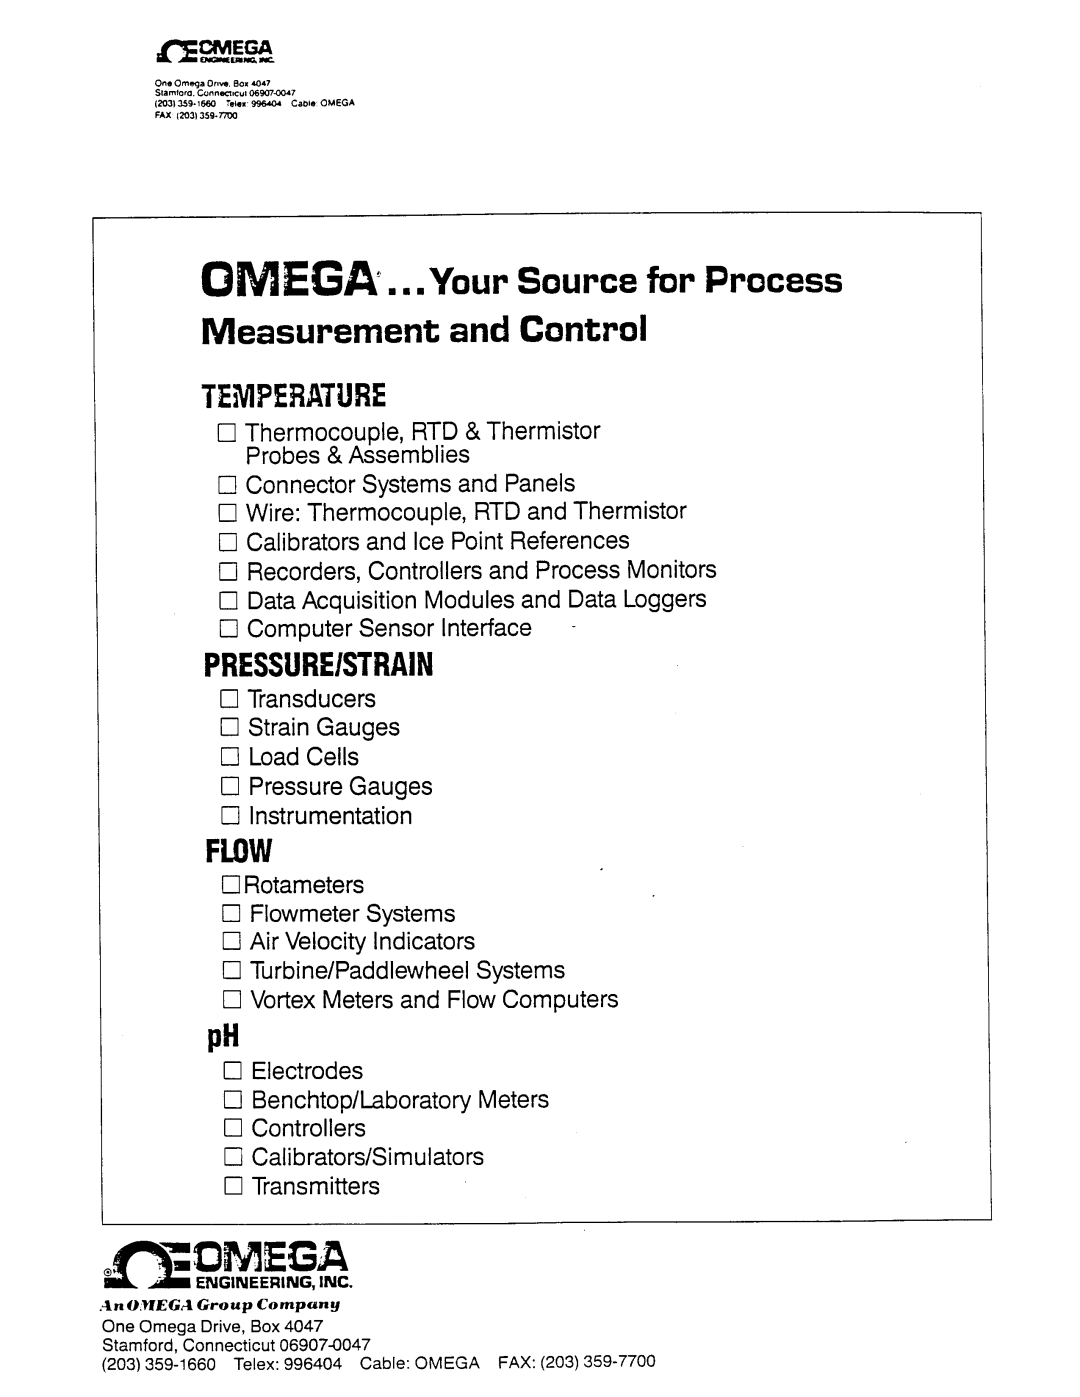 Omega Engineering PHTX-11 manual QWKE%k,. .Your Source for Process Measurement and Control 